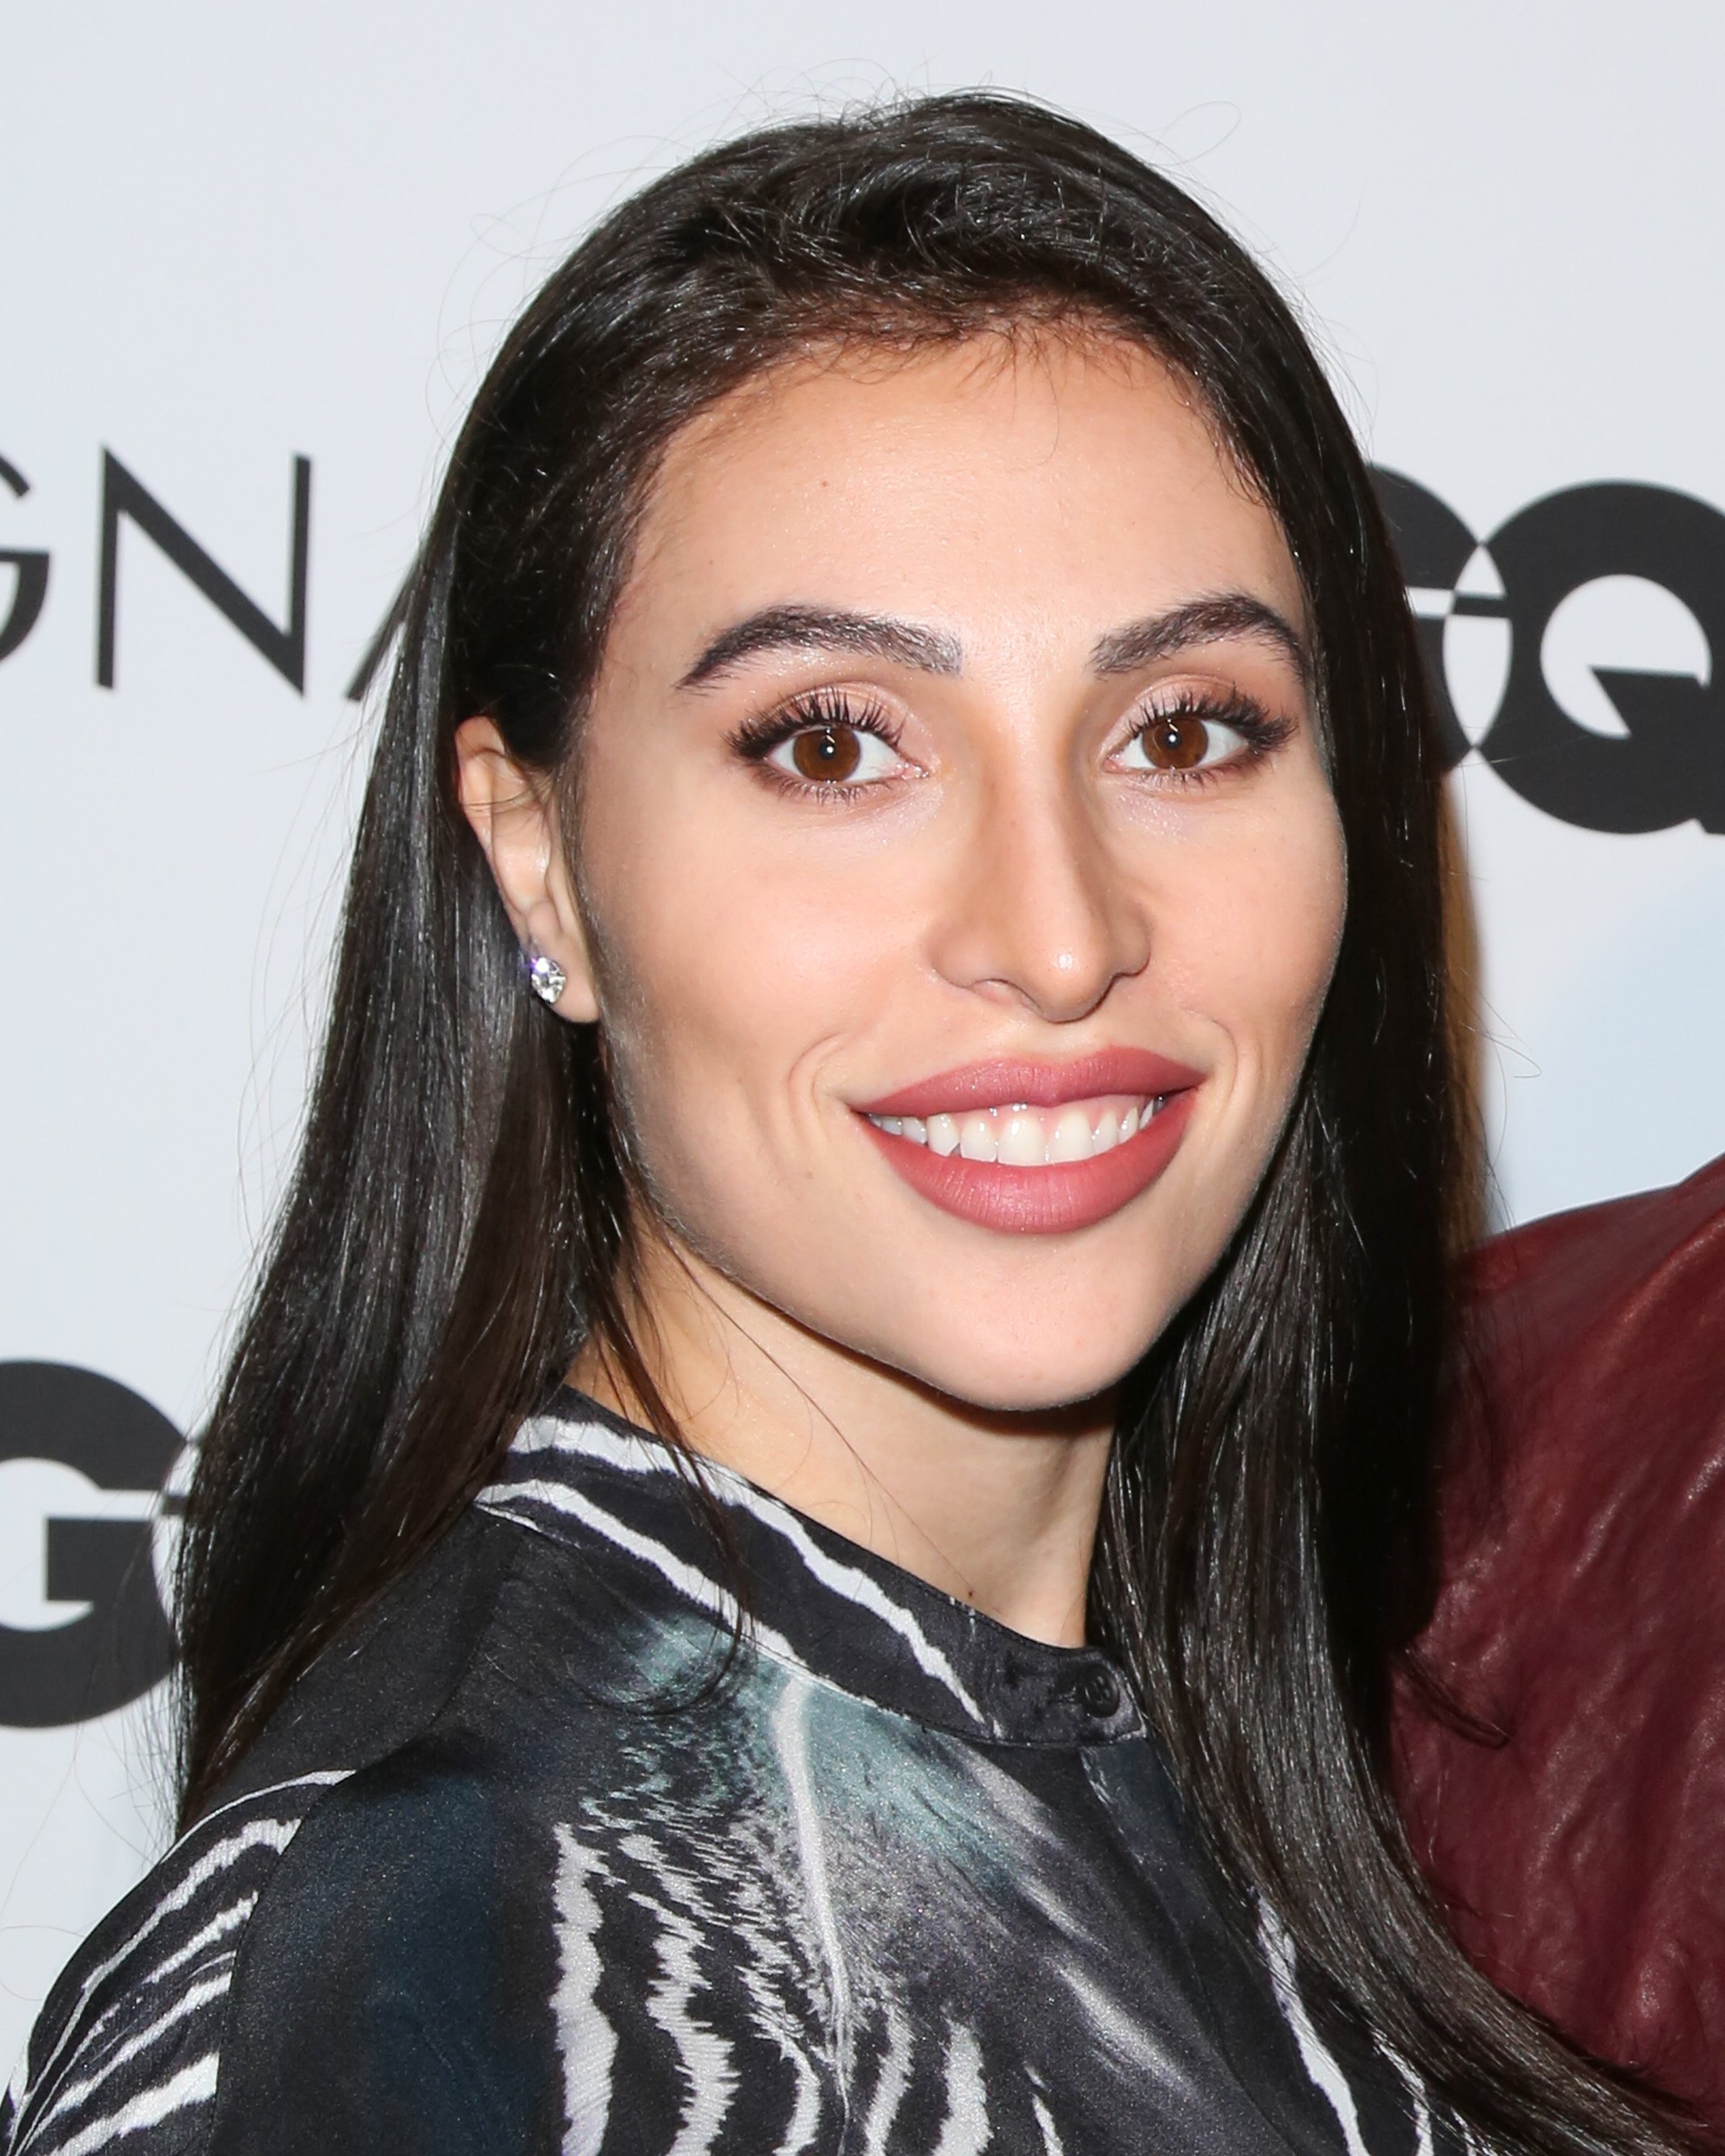 Lilit Avagyan at the GQ and Z Zegna celebration event on February 5, 2015, in West Hollywood | Source: Getty Images